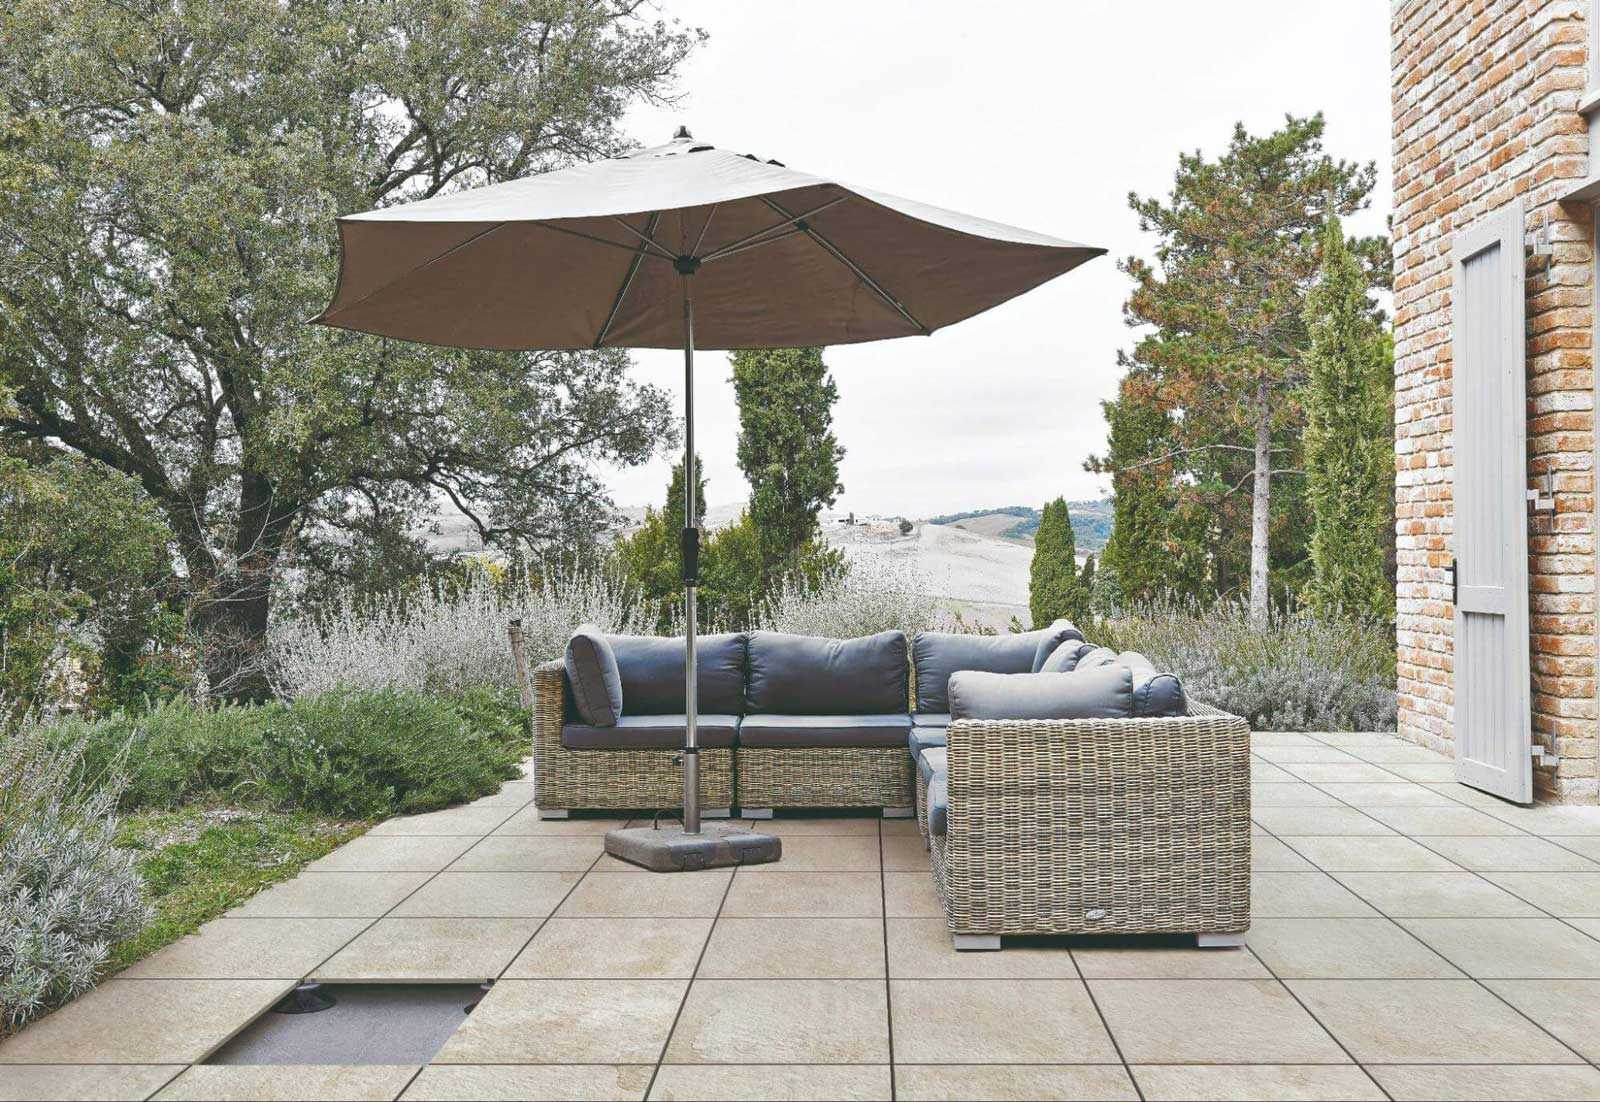 Outdoor tile deck with patio furniture.